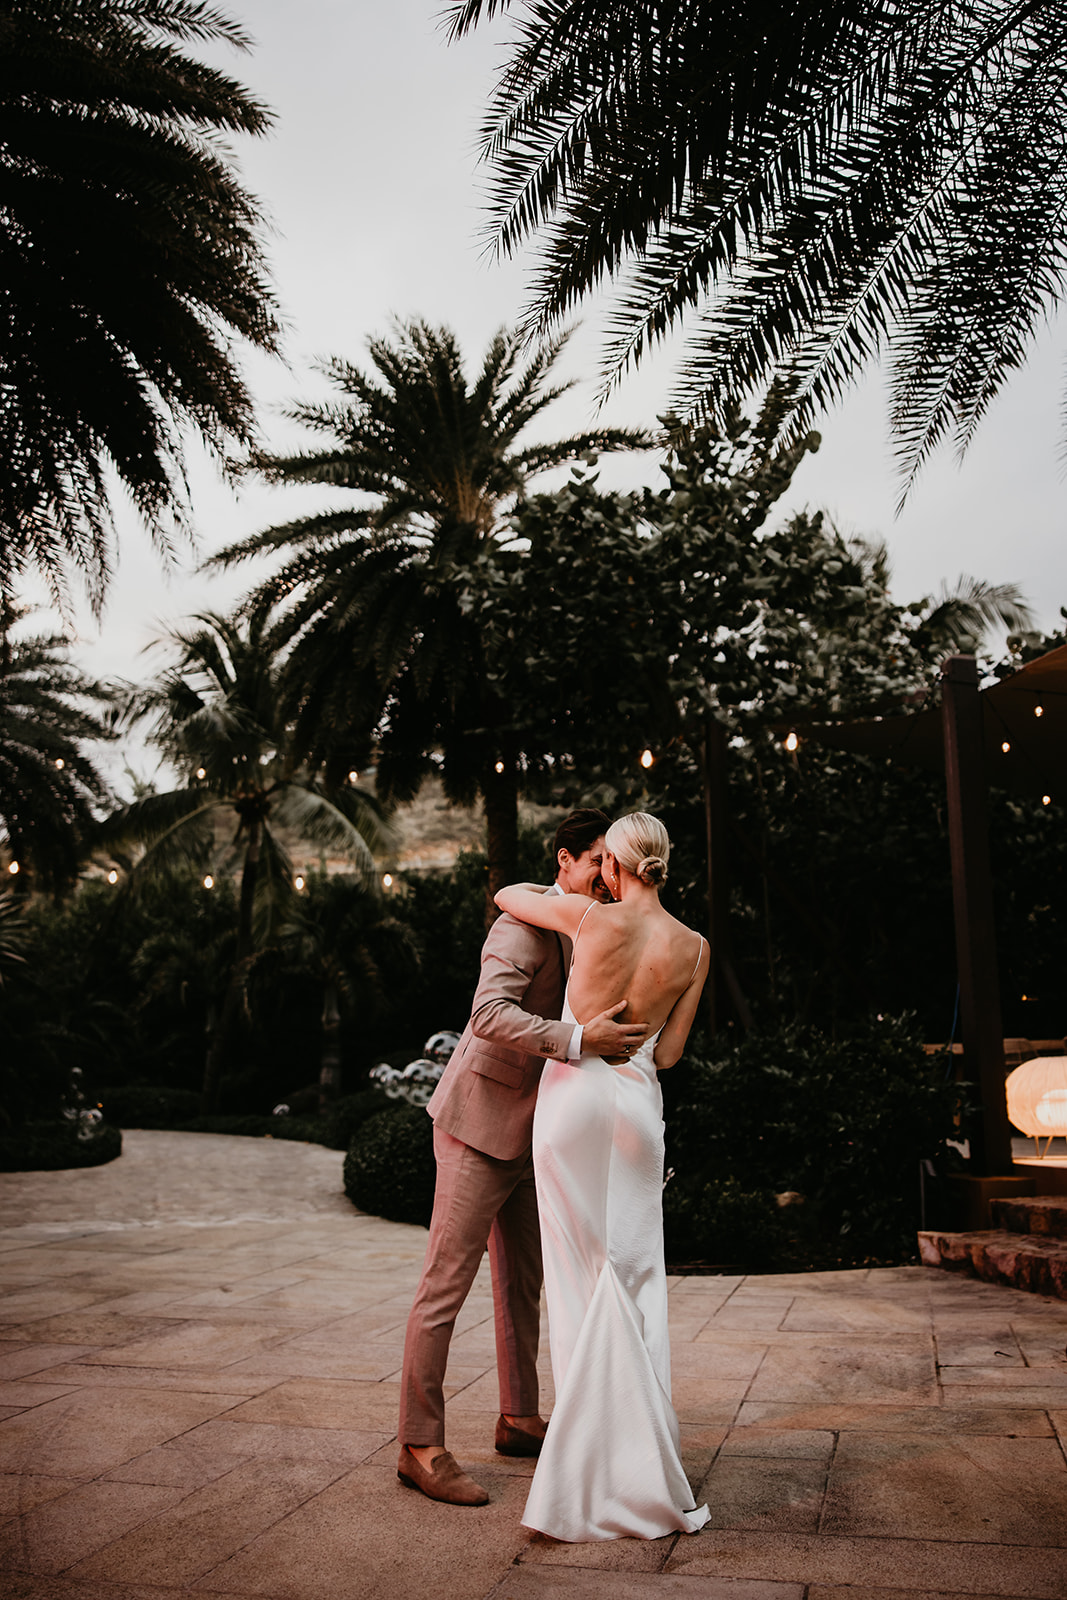 Romantic first dance under a starry sky on a beautiful beach in the British Virgin Islands